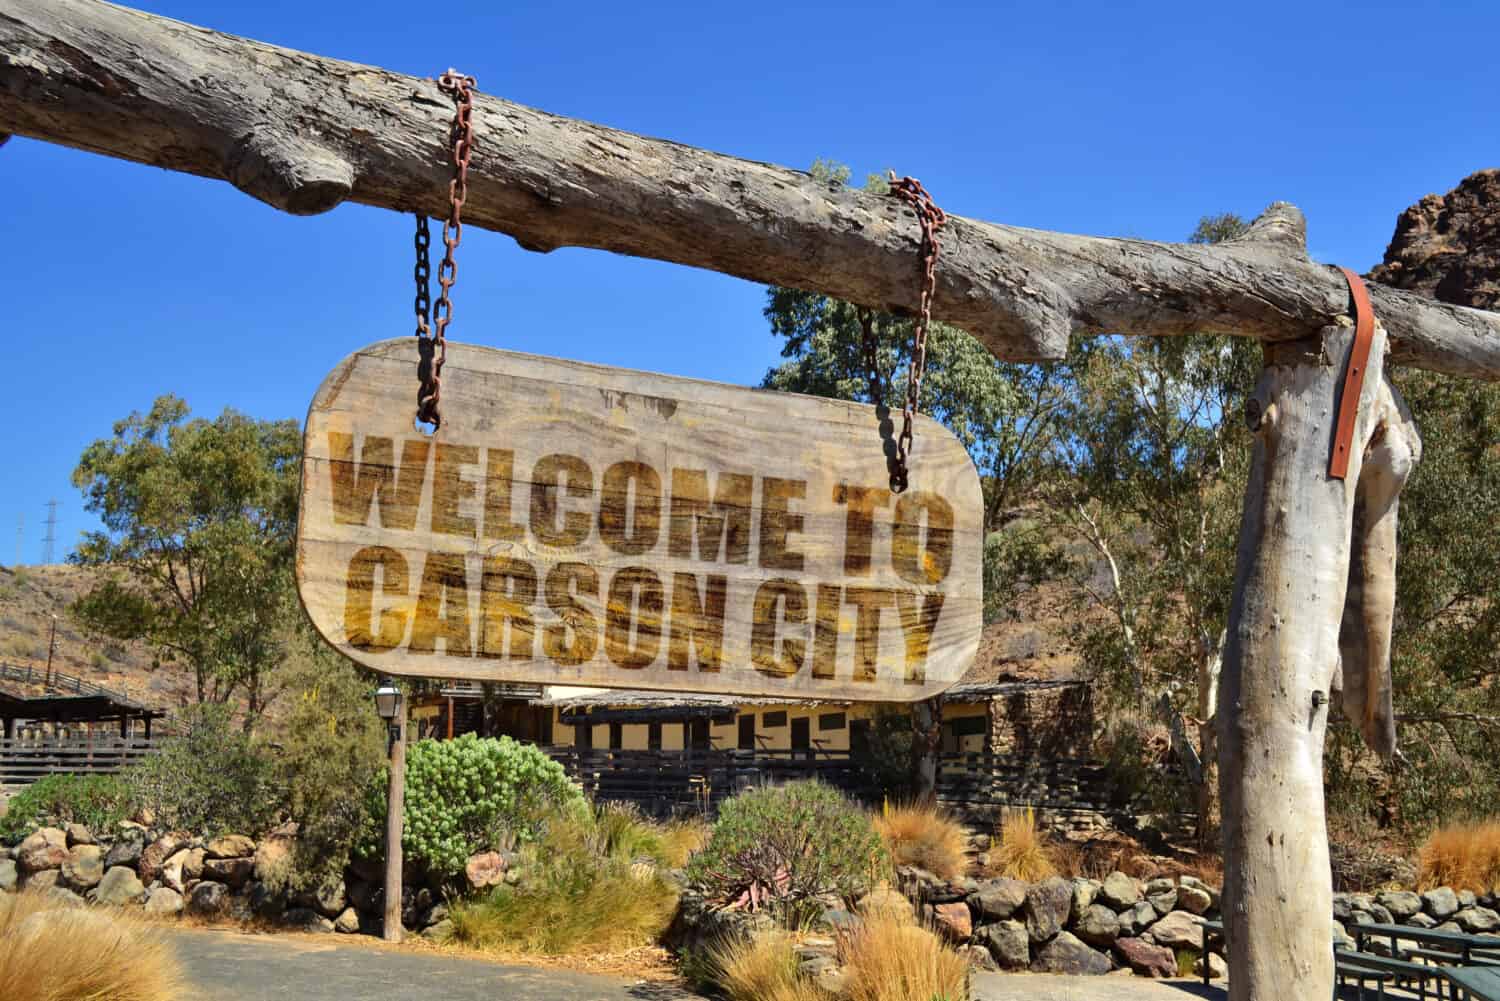 old vintage wood signboard with text " welcome to Carson City" hanging on a branch